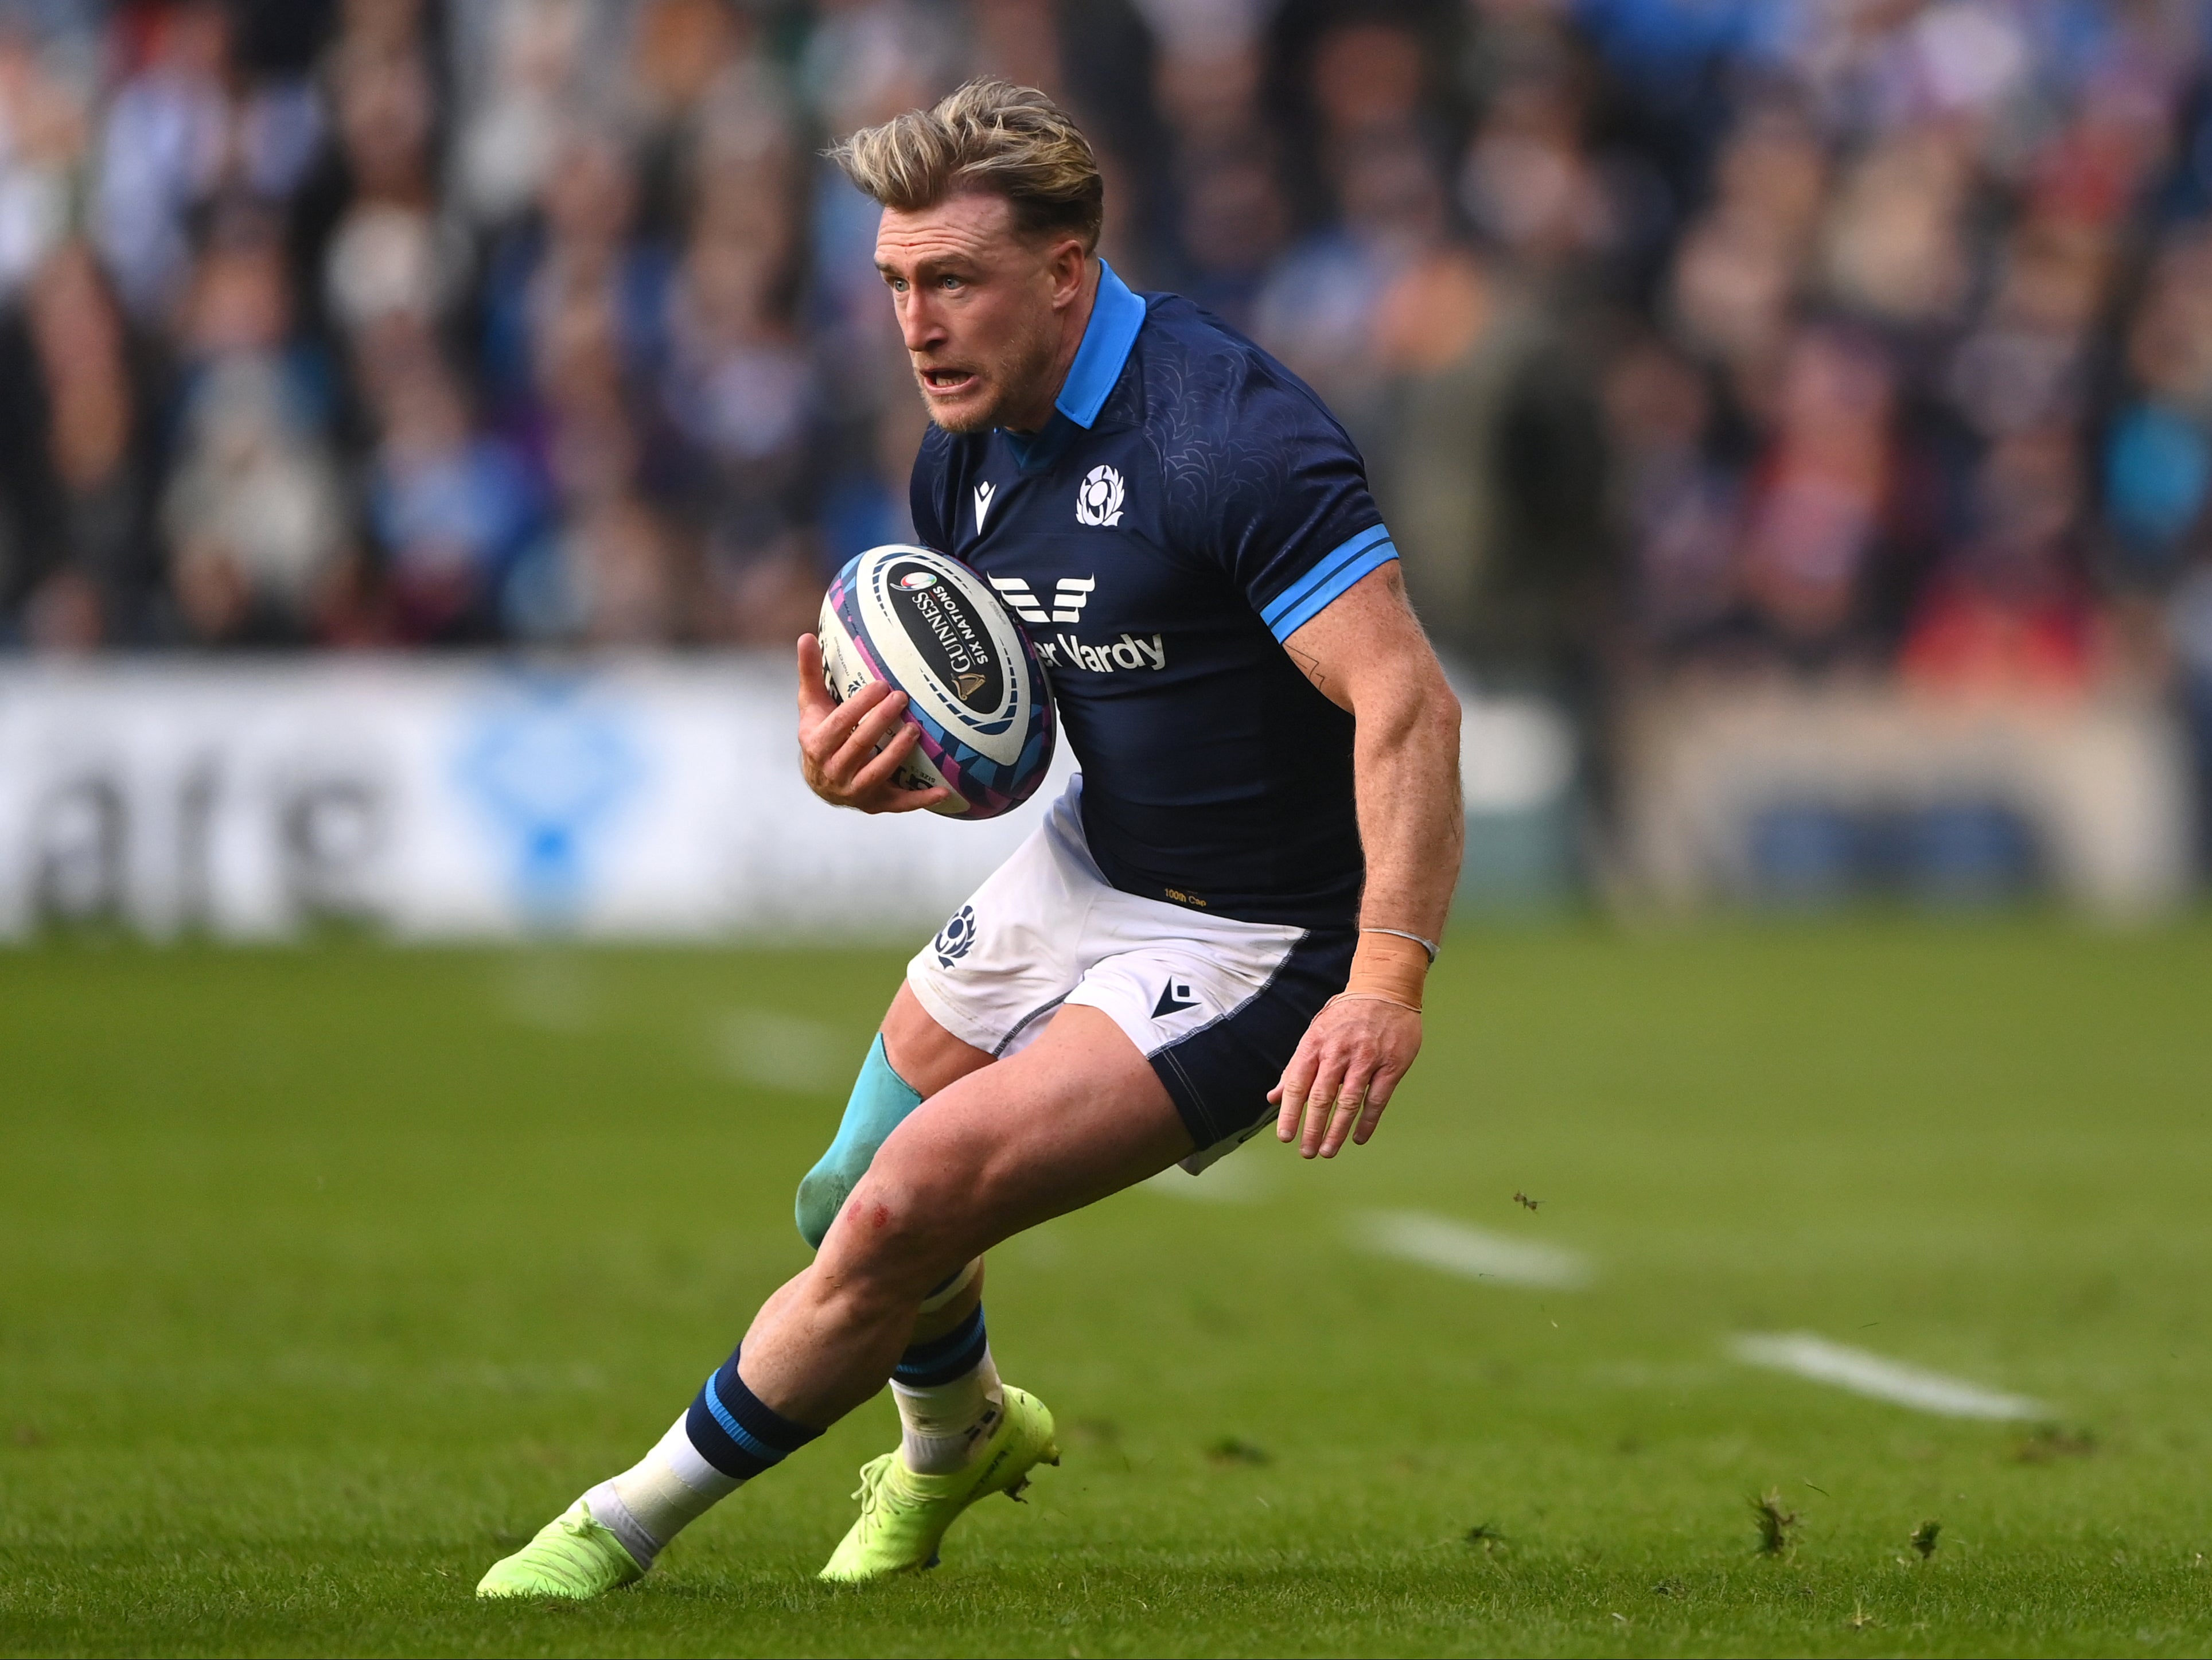 Stuart Hogg has won 100 Scotland caps but will retire after this autumn’s World Cup